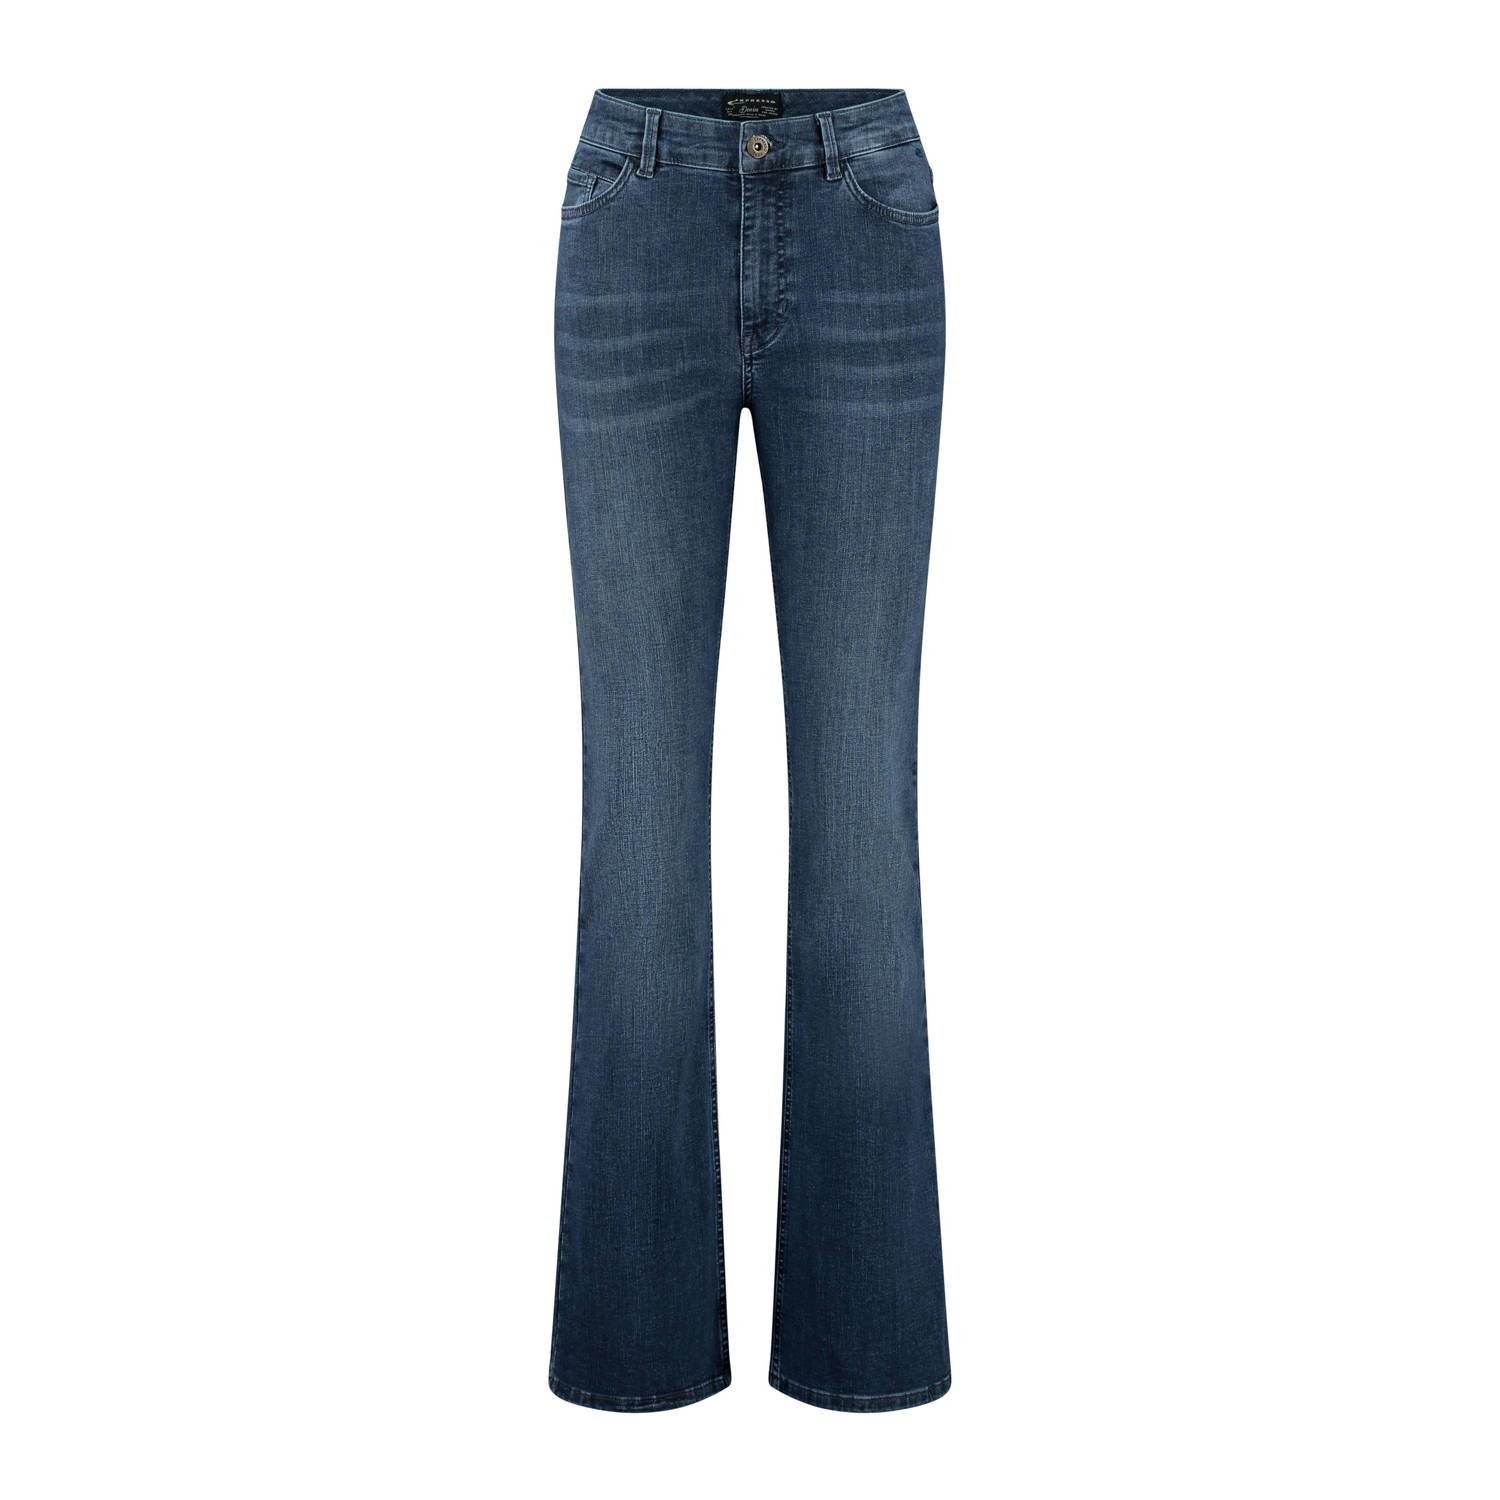 Expresso flared jeans